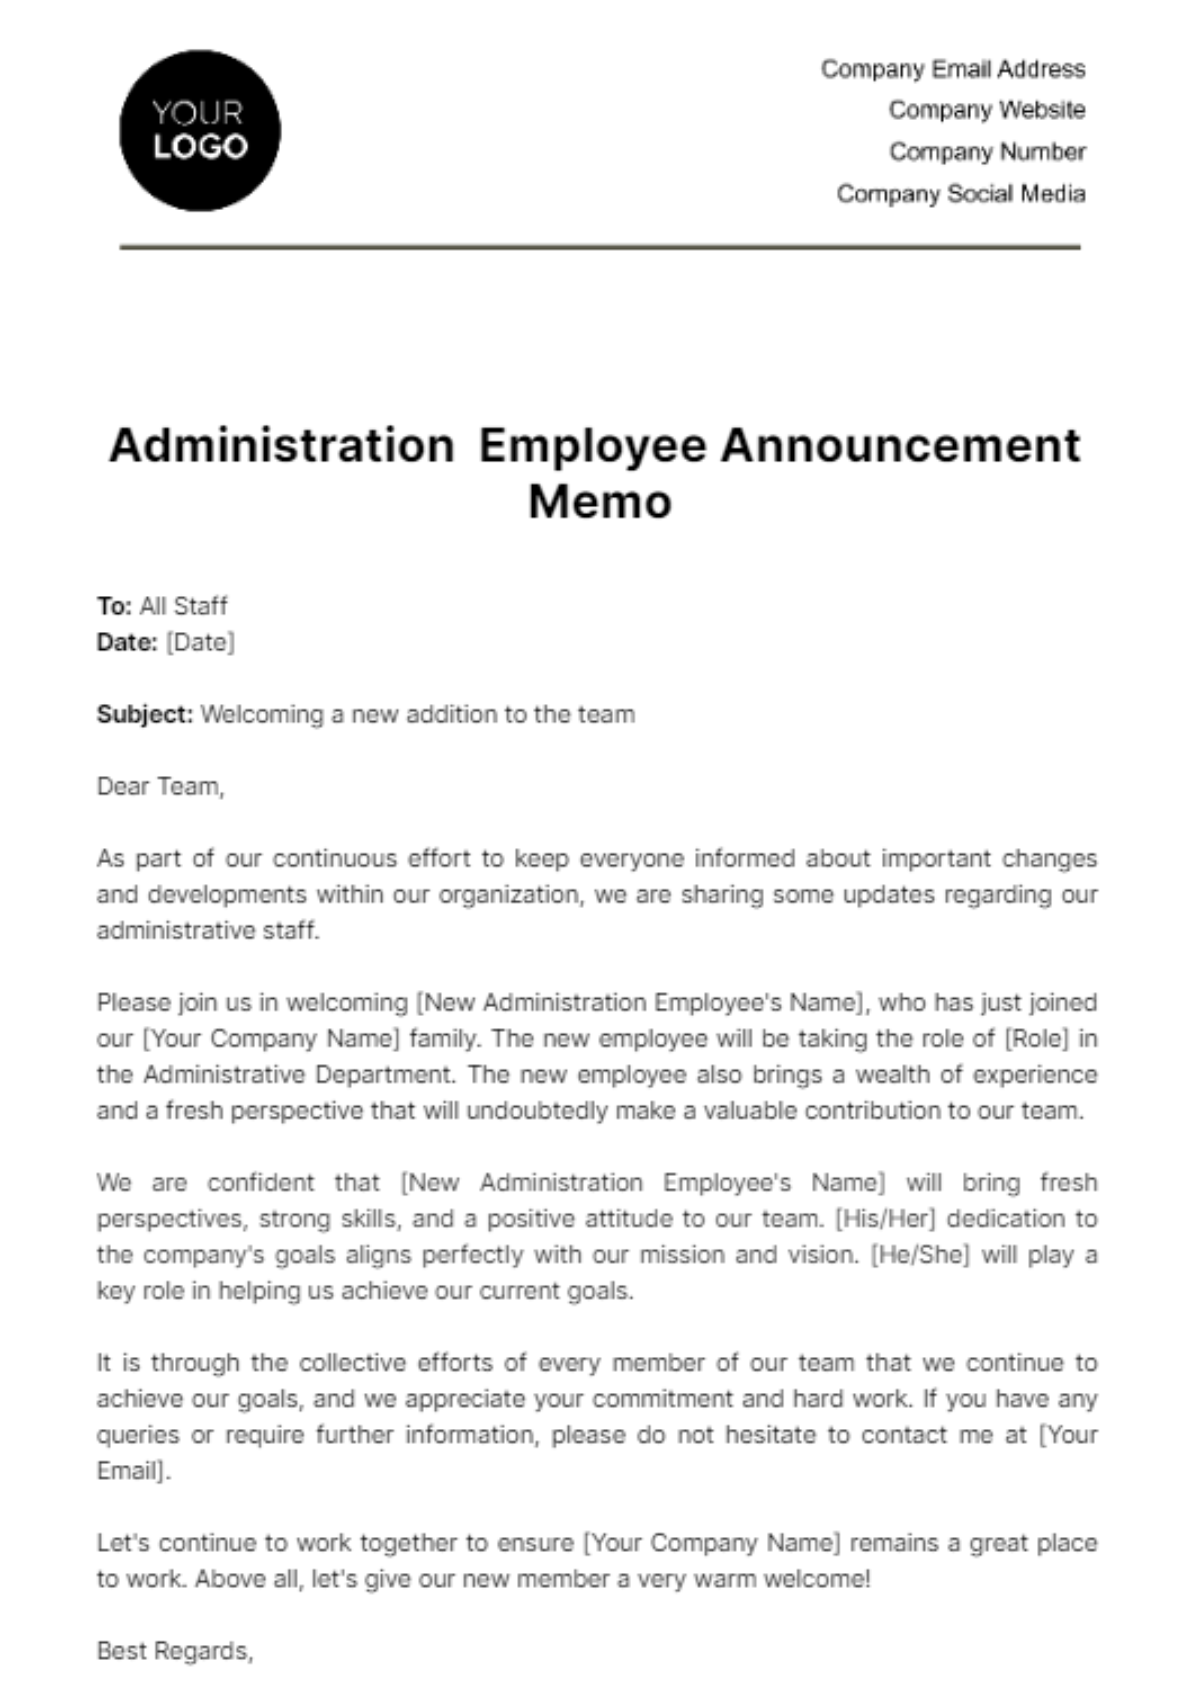 Administration Employee Announcement Memo Template